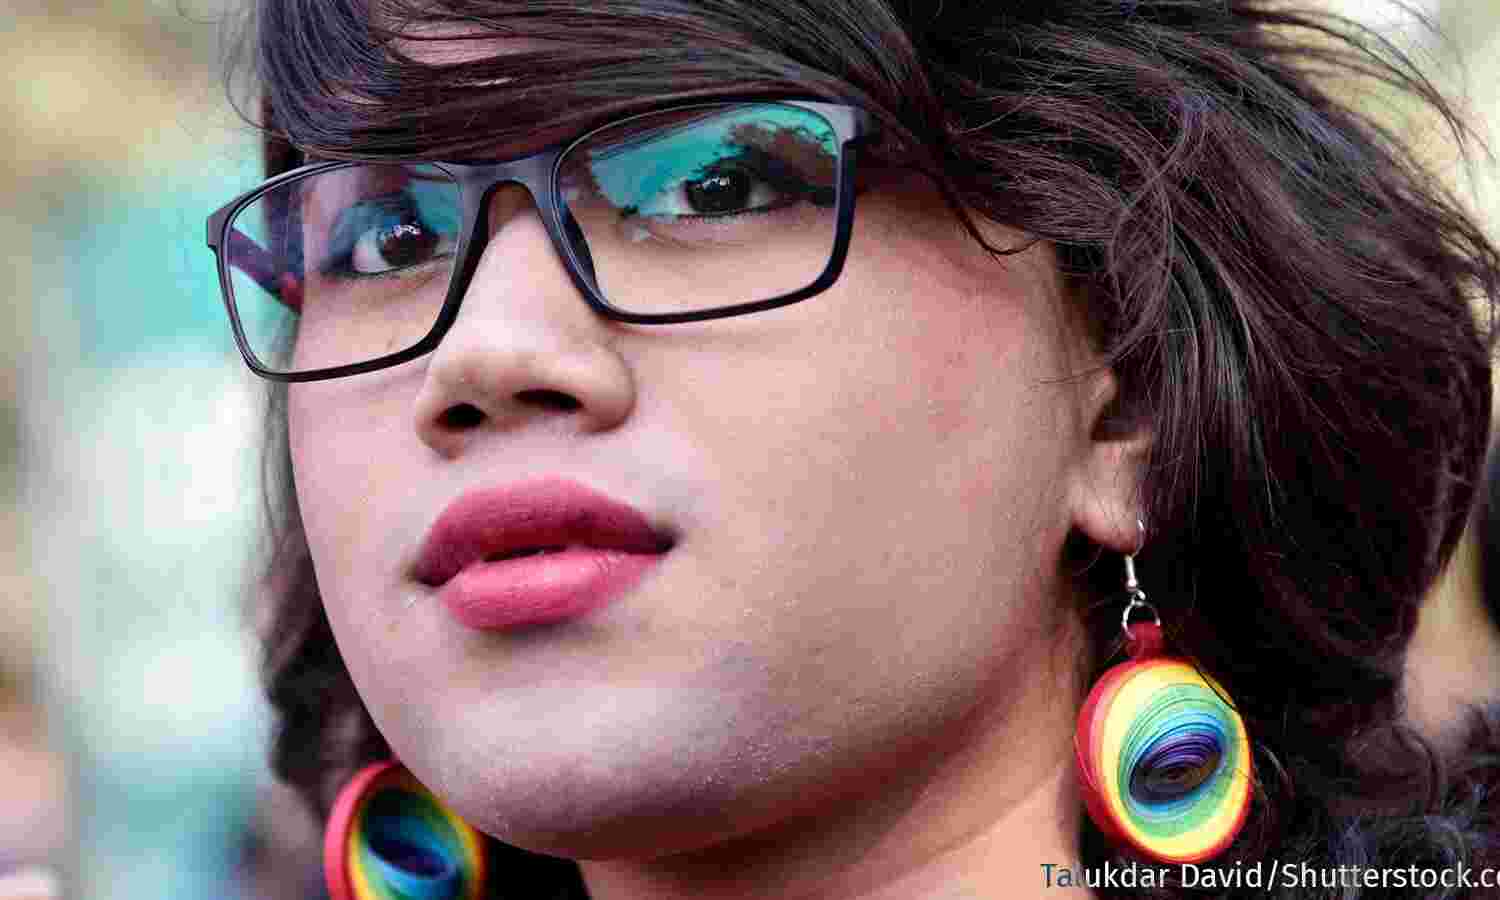 Denied Visibility In Official Data, Transgender Indians Cant Access Benefits, Services